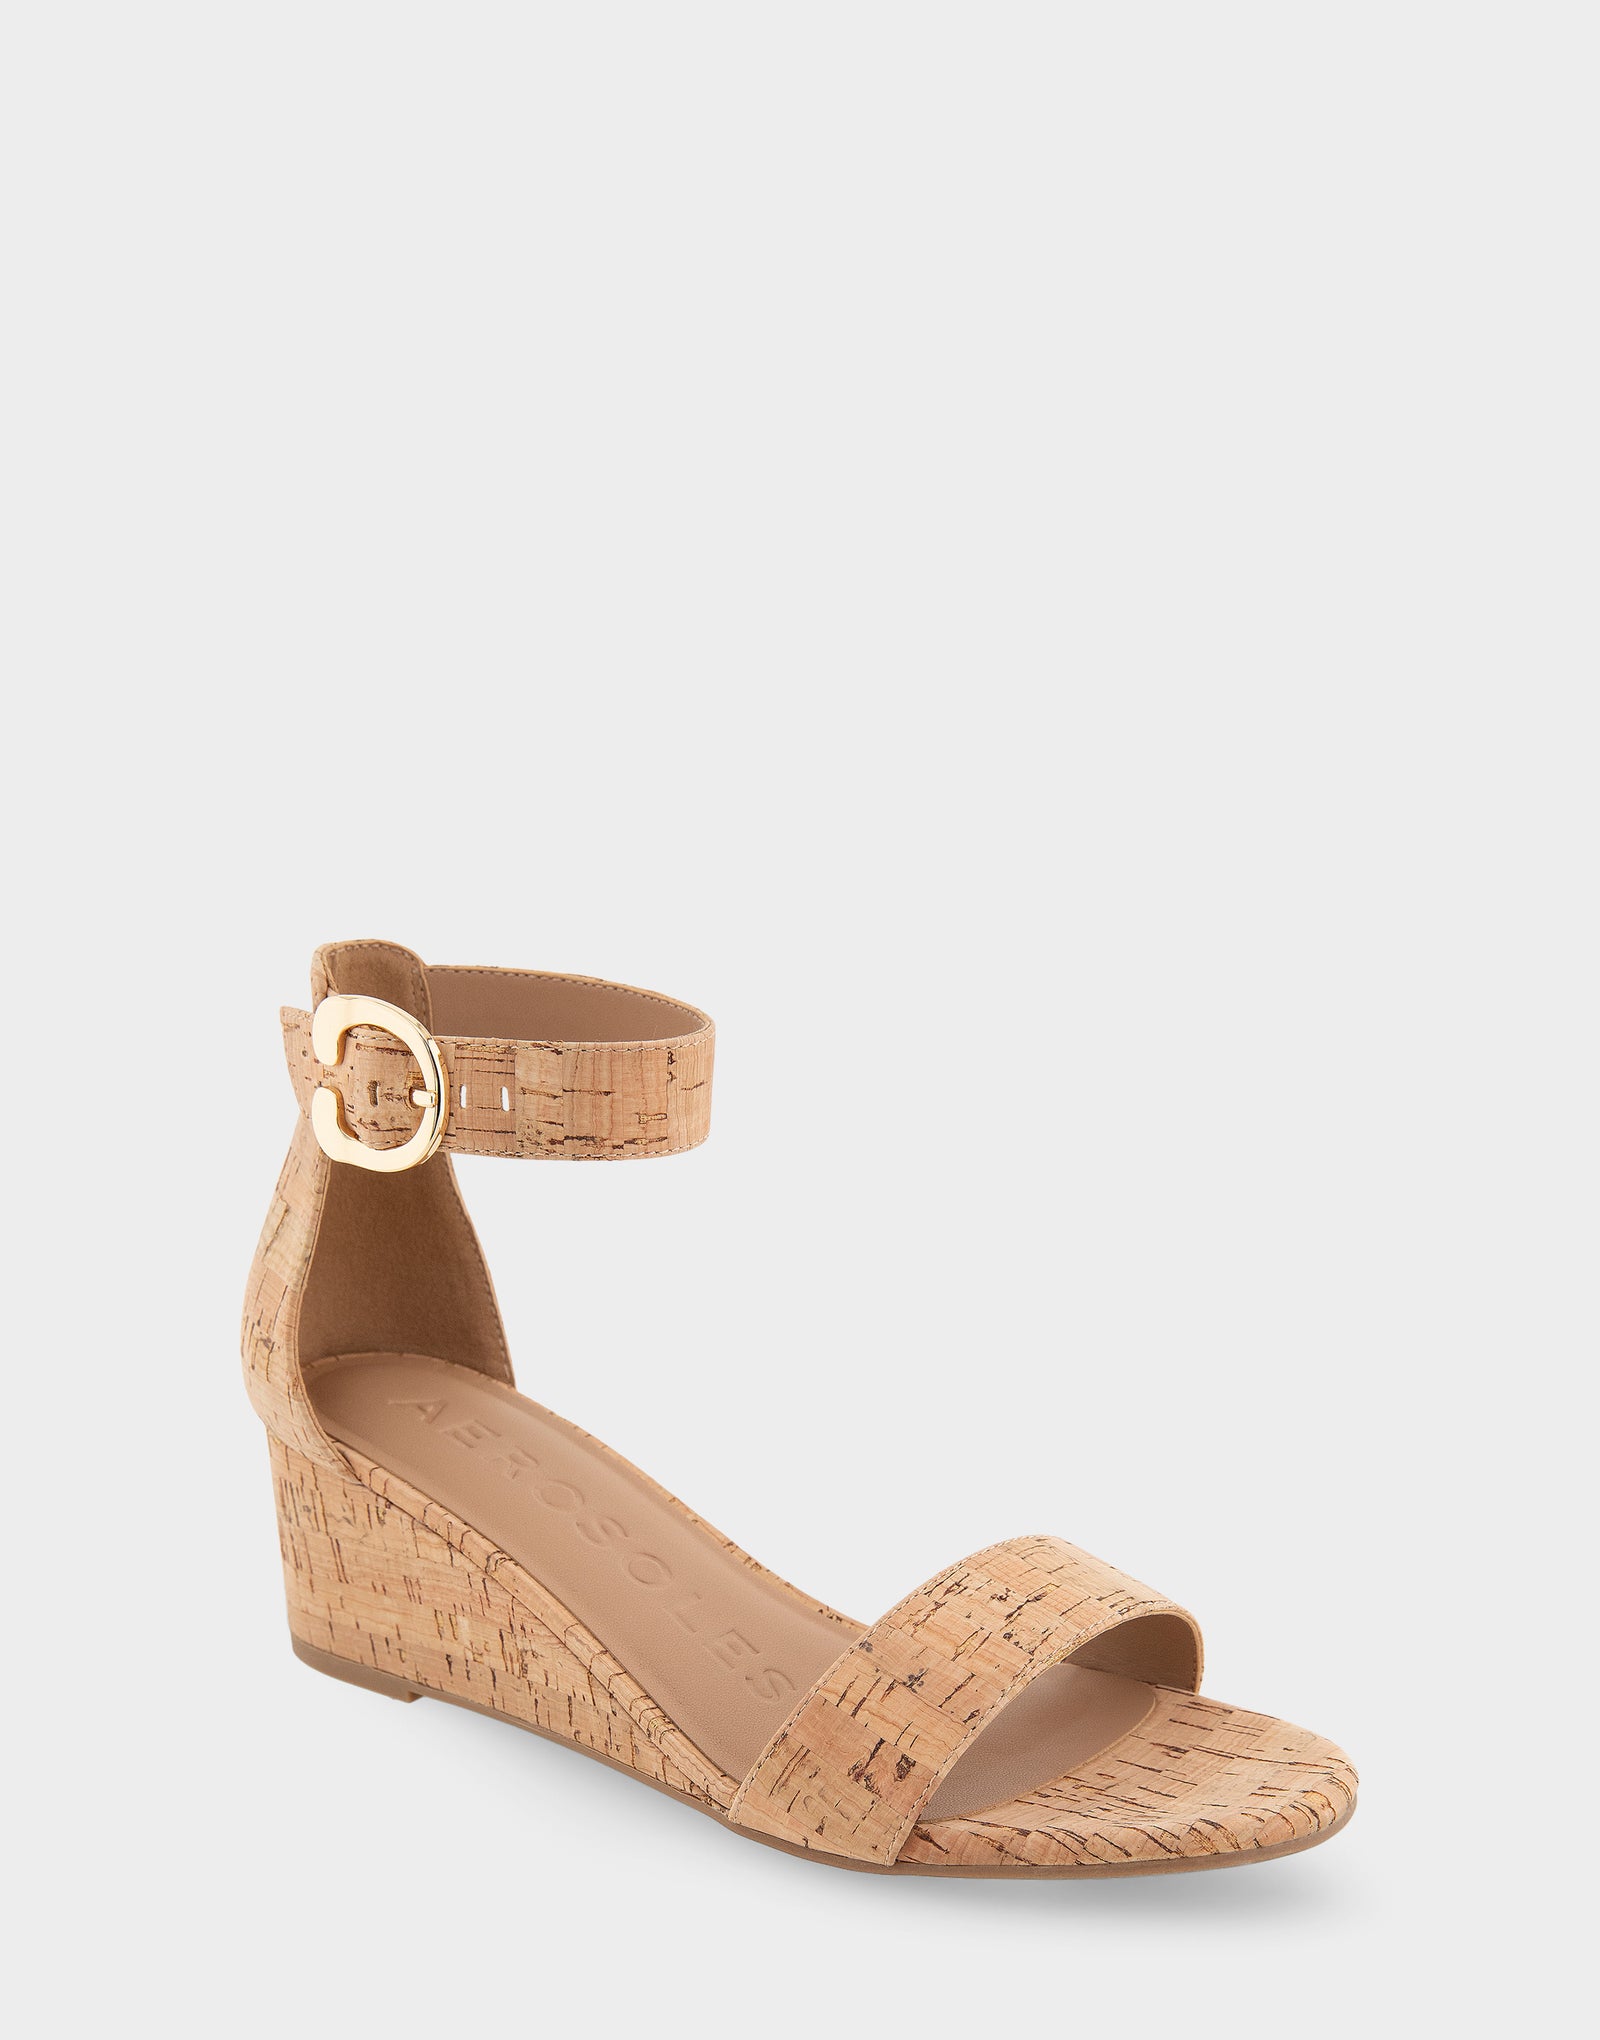 Women's Ankle Strap Mid Wedge Sandal in Cork Faux Leather